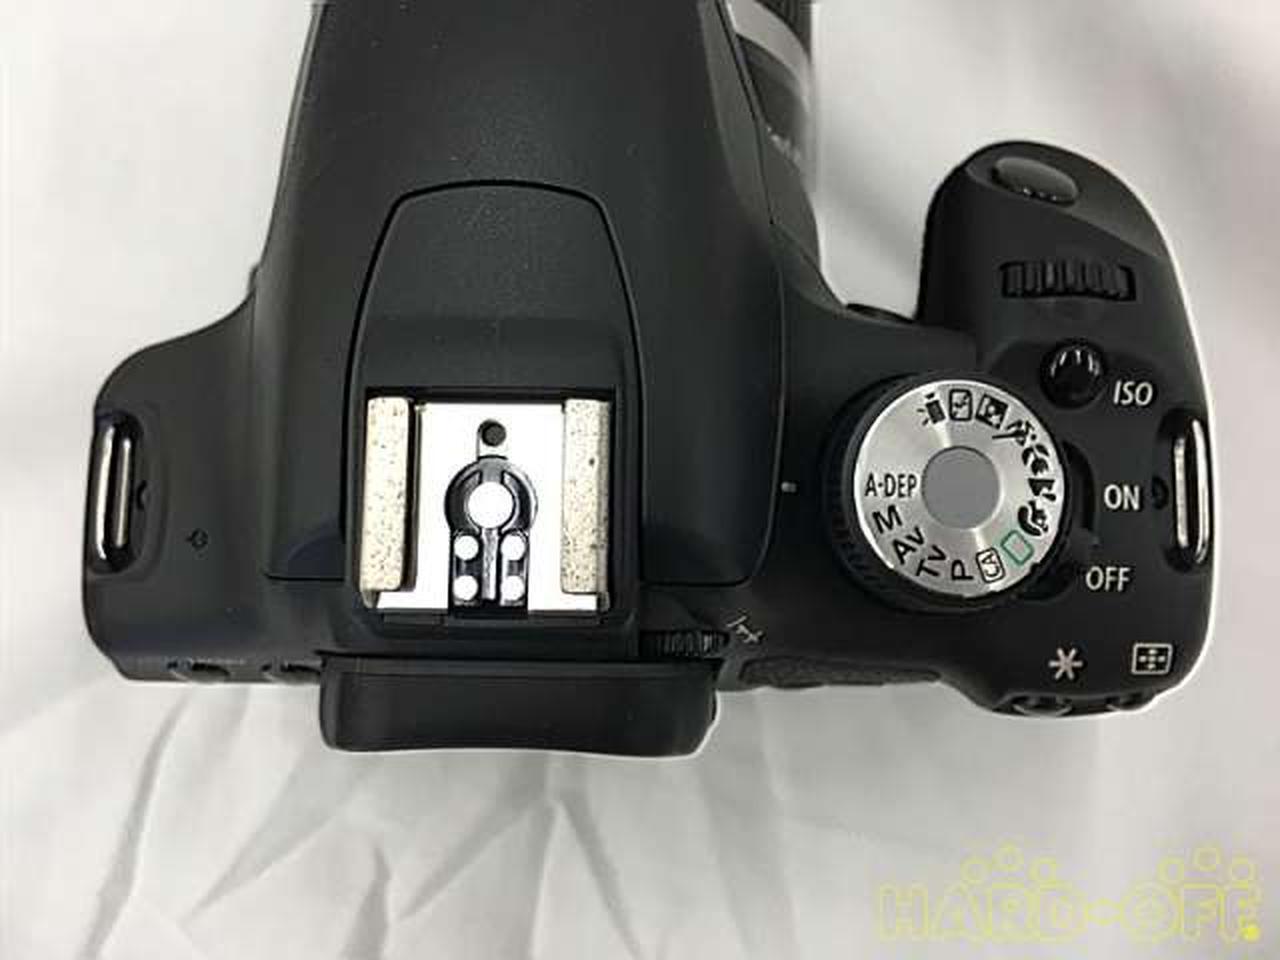 Canon model number: EOS KISS X3 double zoom kit Used in Japan